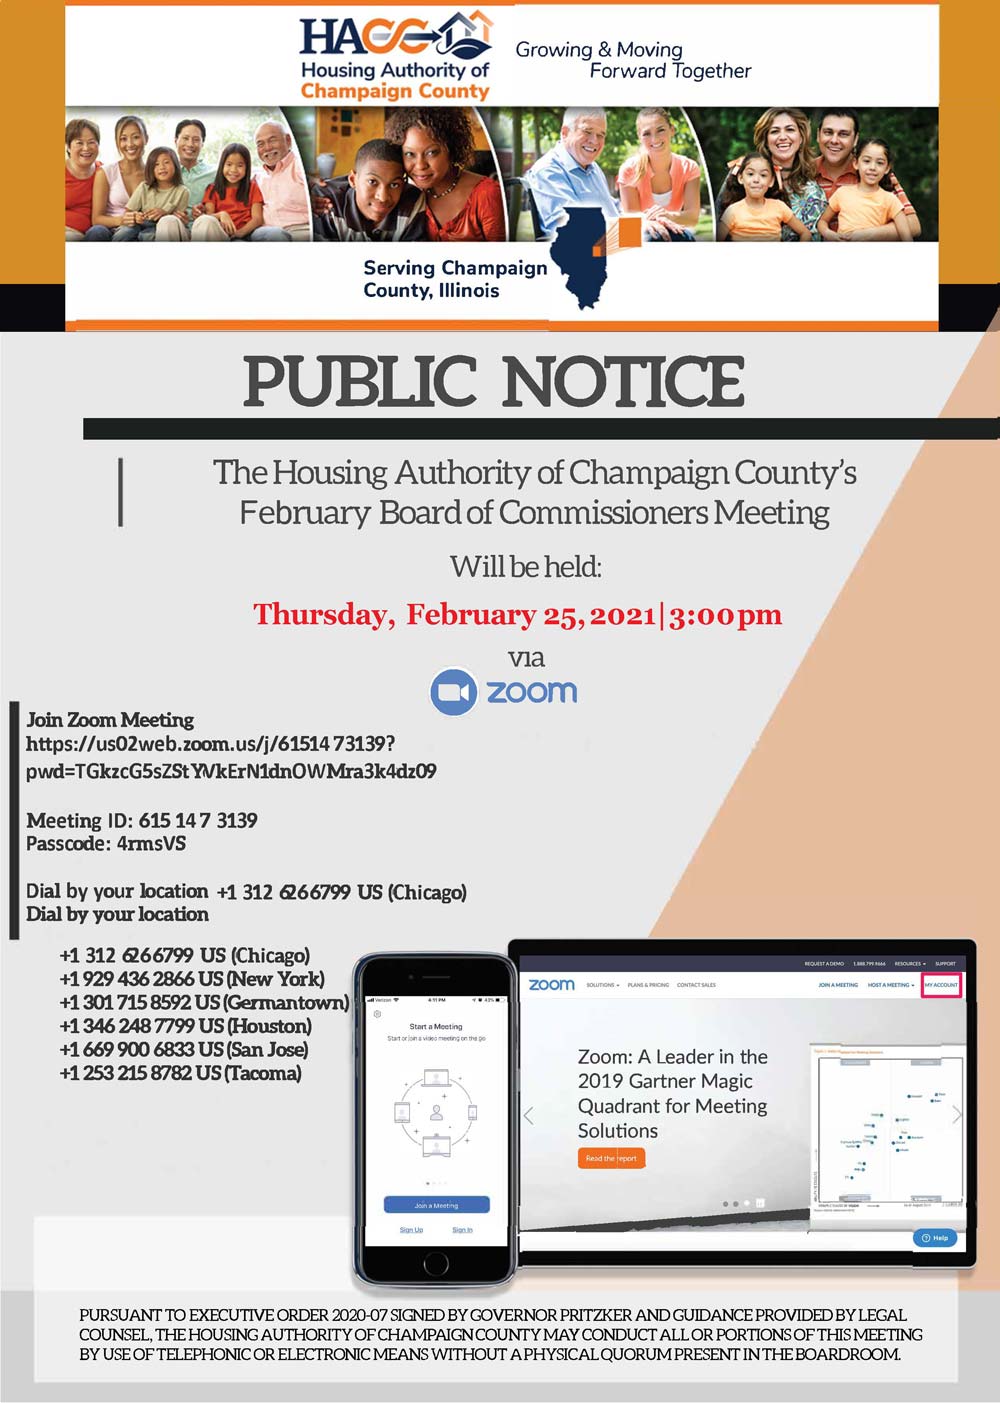 February Board of Commissioners Meeting flyer, all information as listed below.